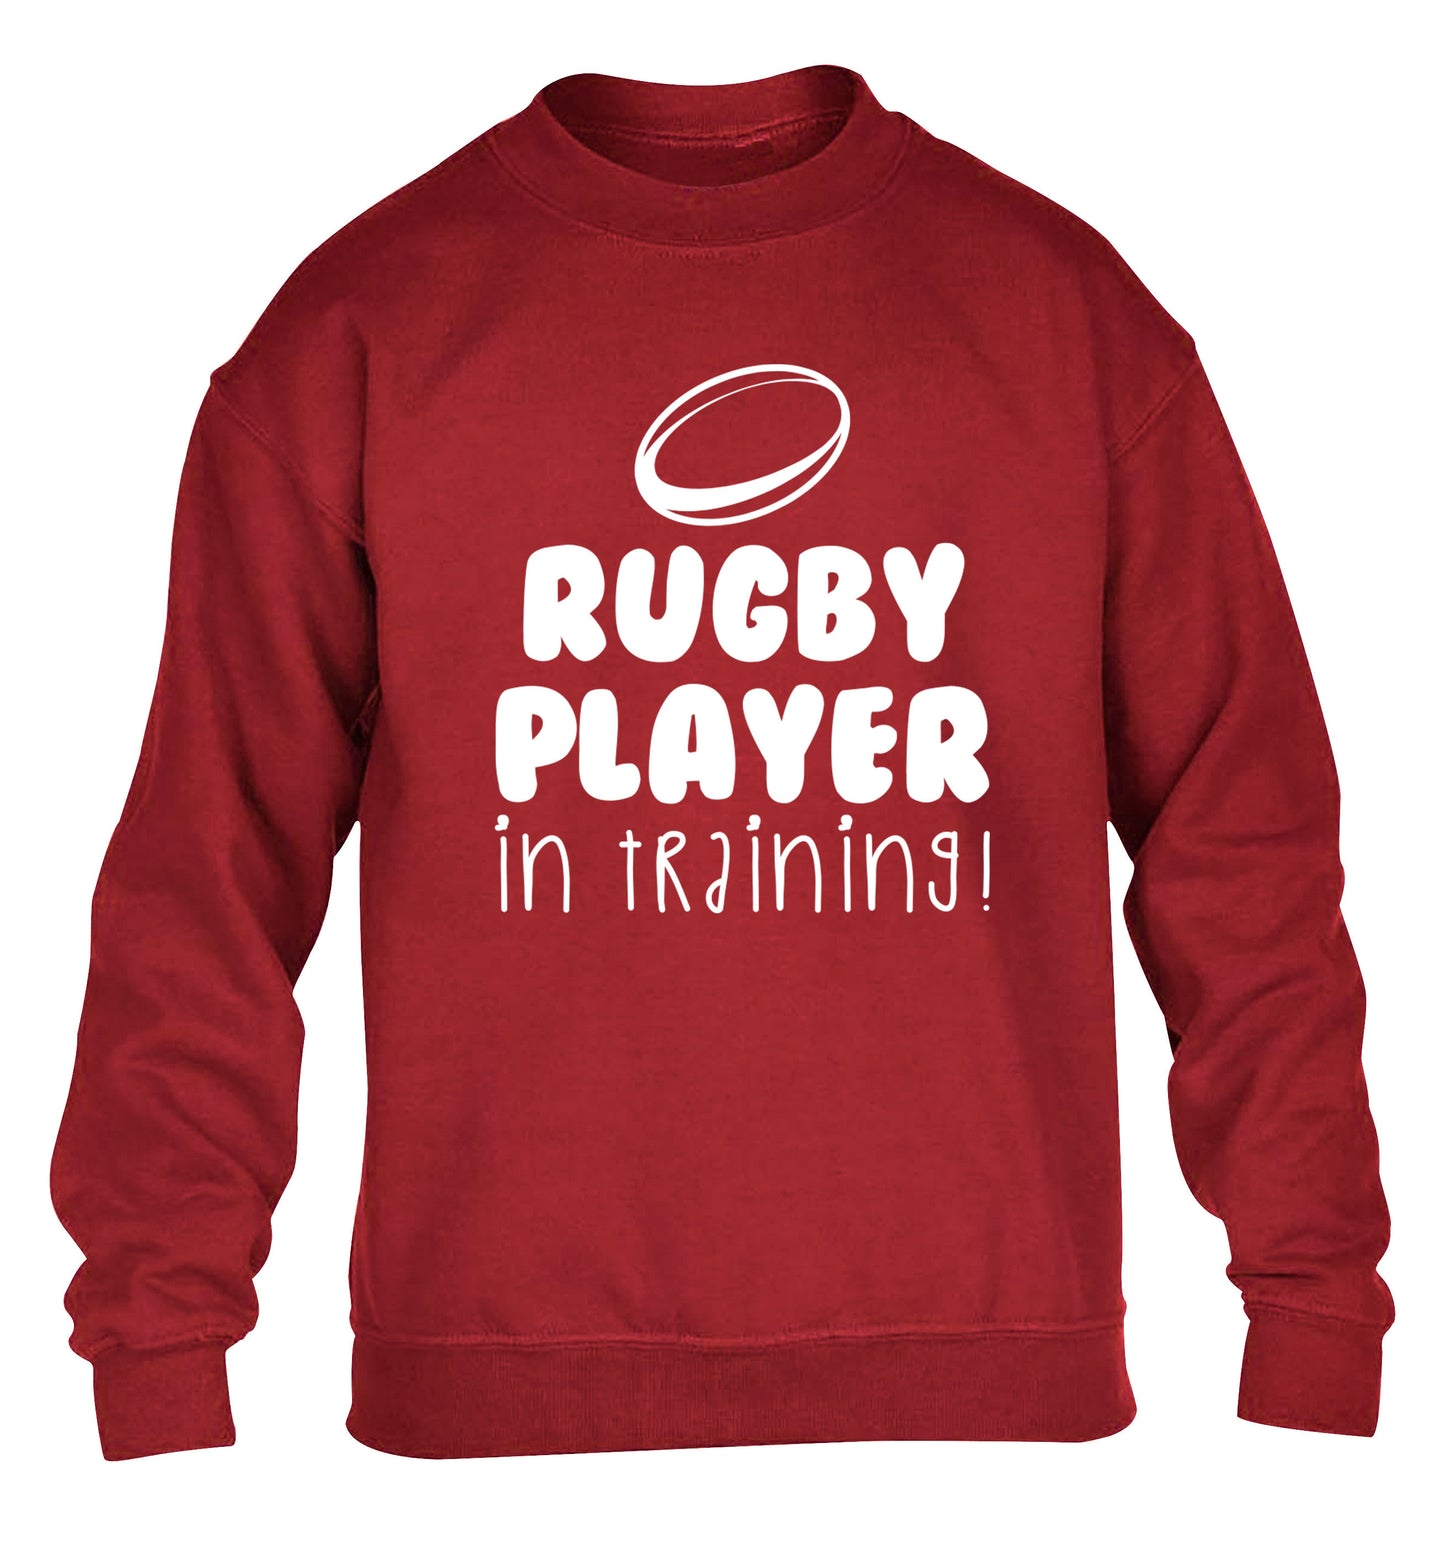 Rugby player in training children's grey sweater 12-14 Years